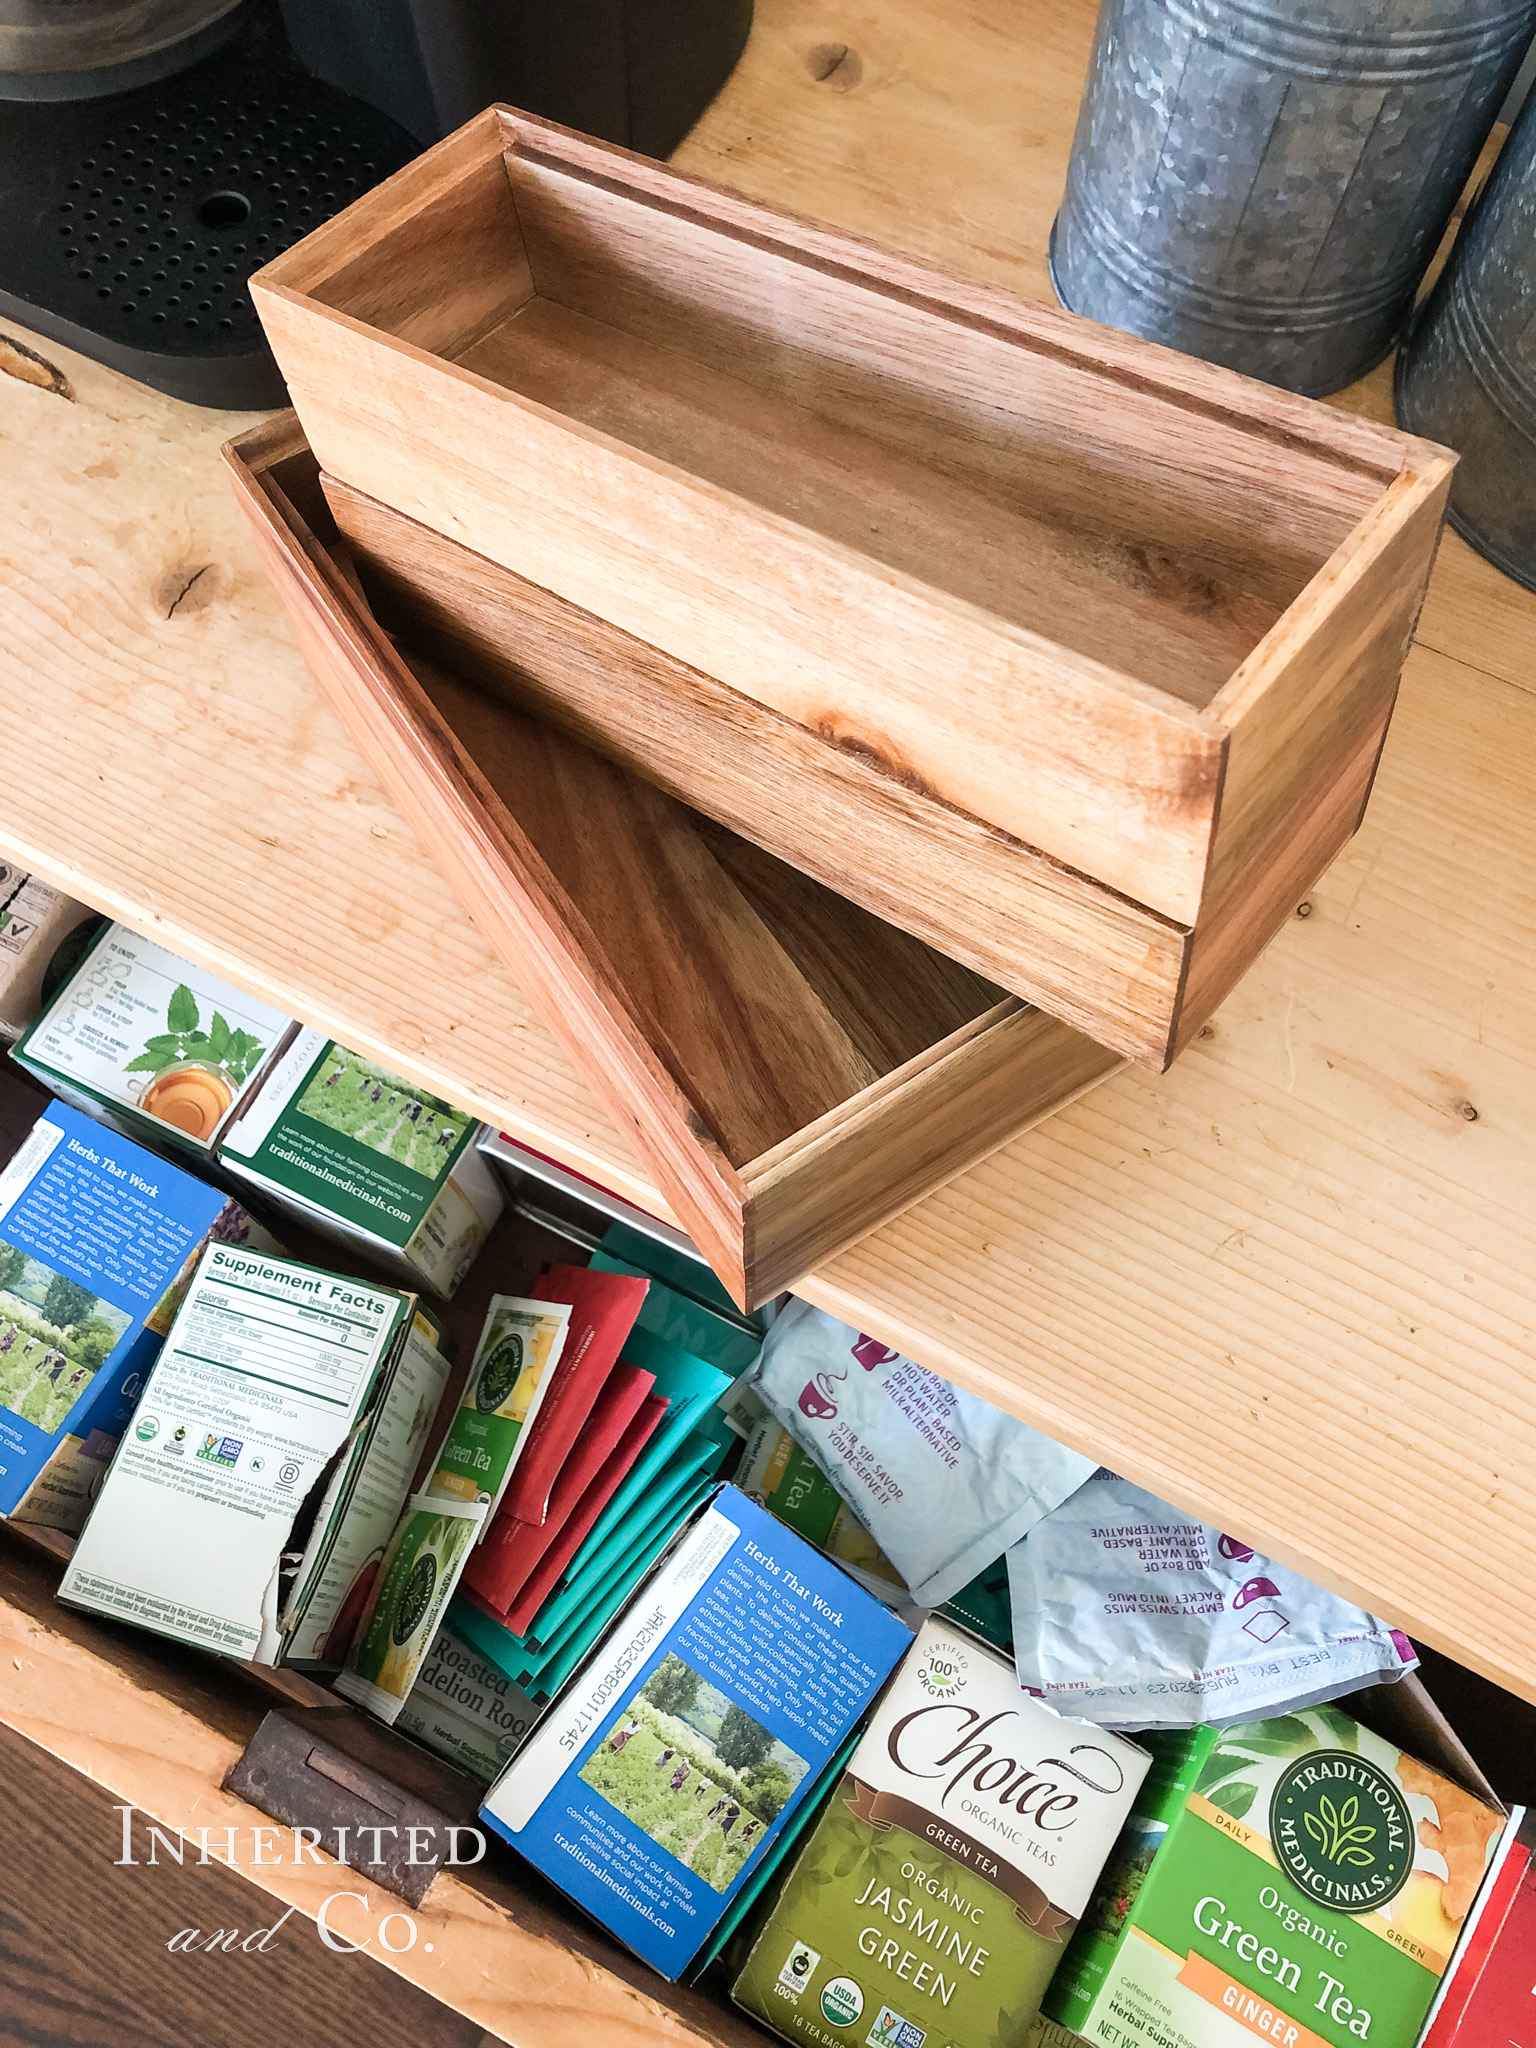 A messy drawer filled with tea bags and acacia organizers above it